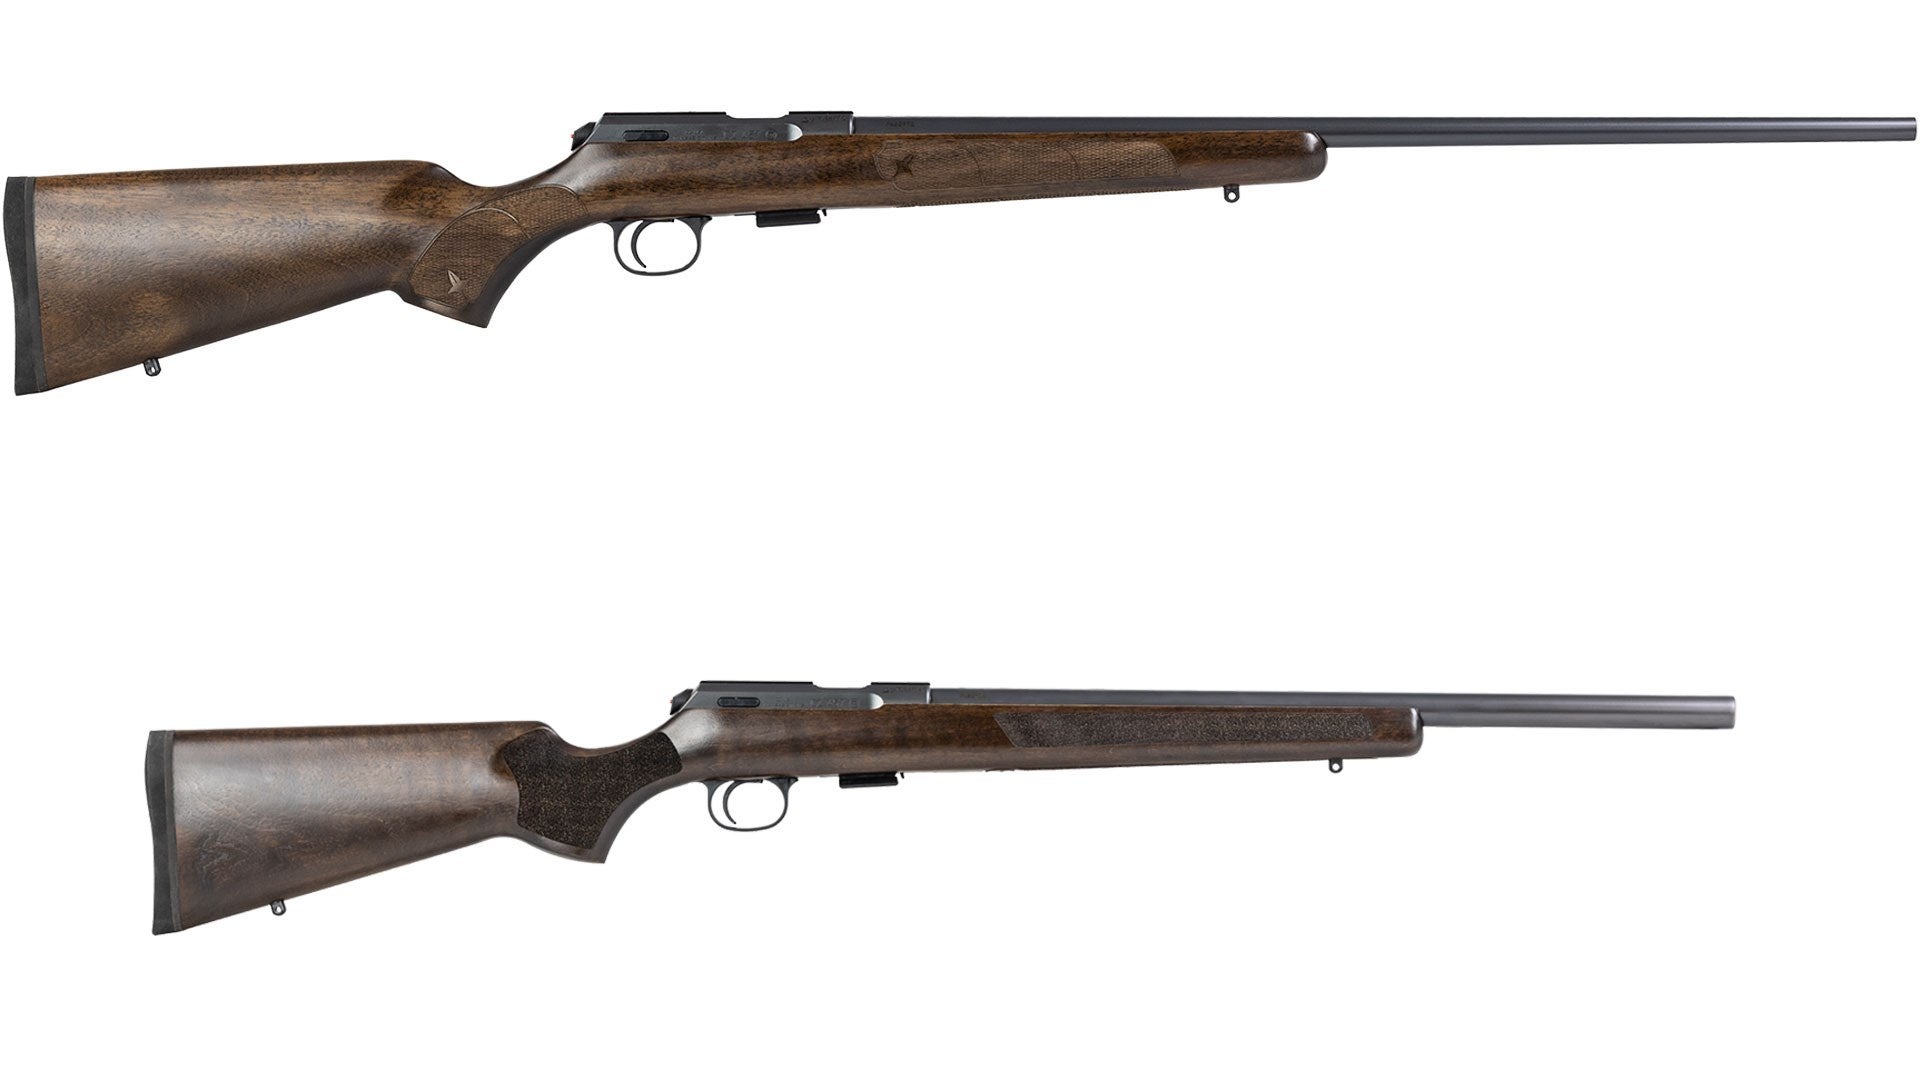 Rimfire for Southpaws - CZ Releases Two New Left-Handed 457 Models